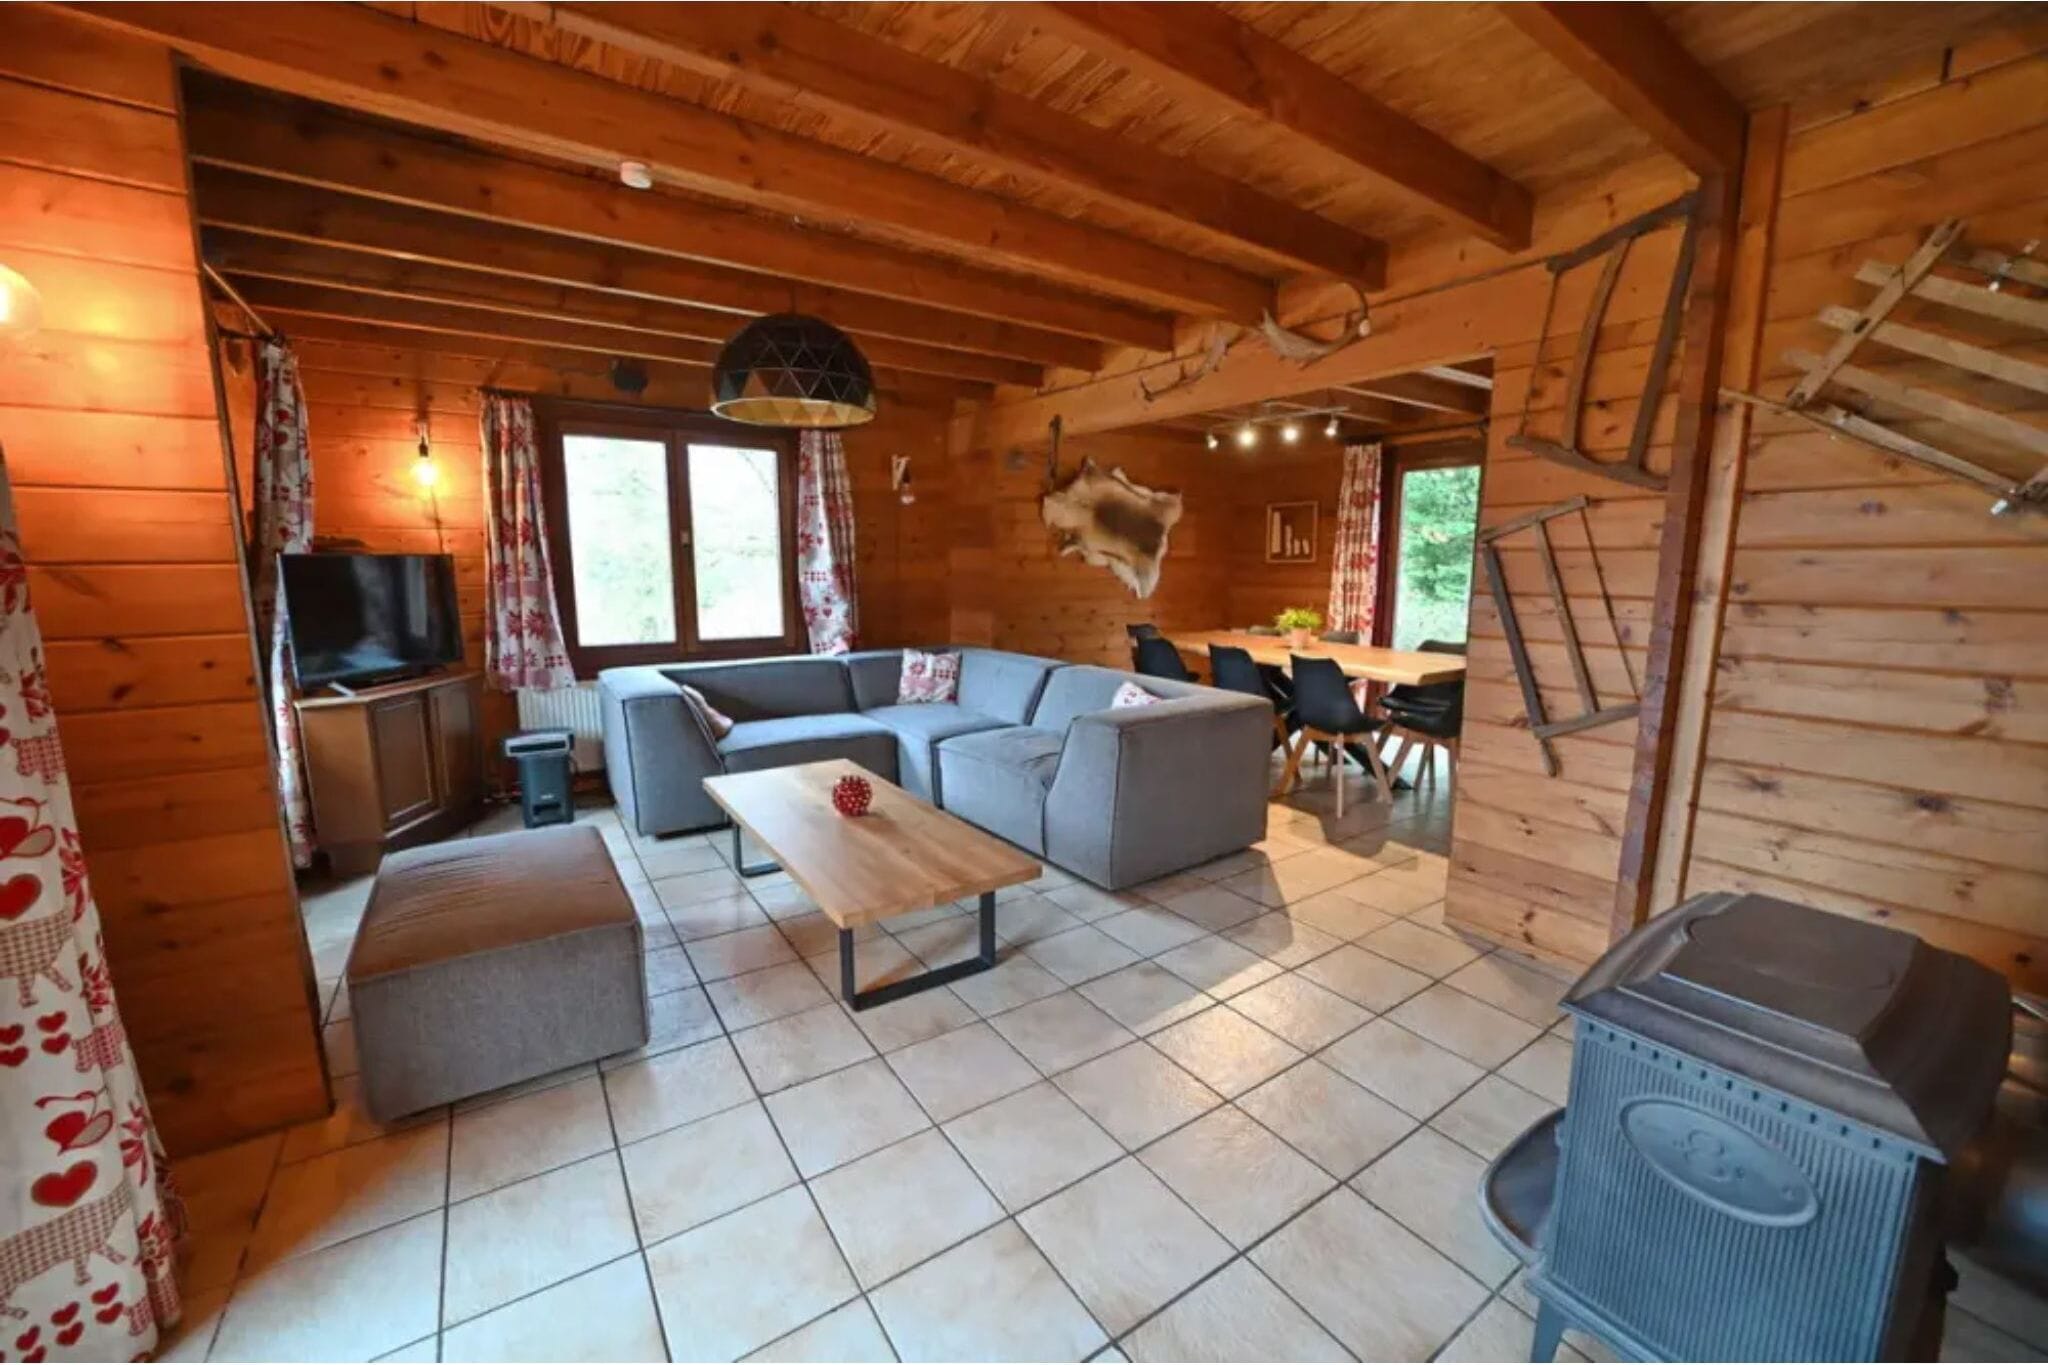 Splendid Holiday Home in Durbuy, gateway to Ardennes